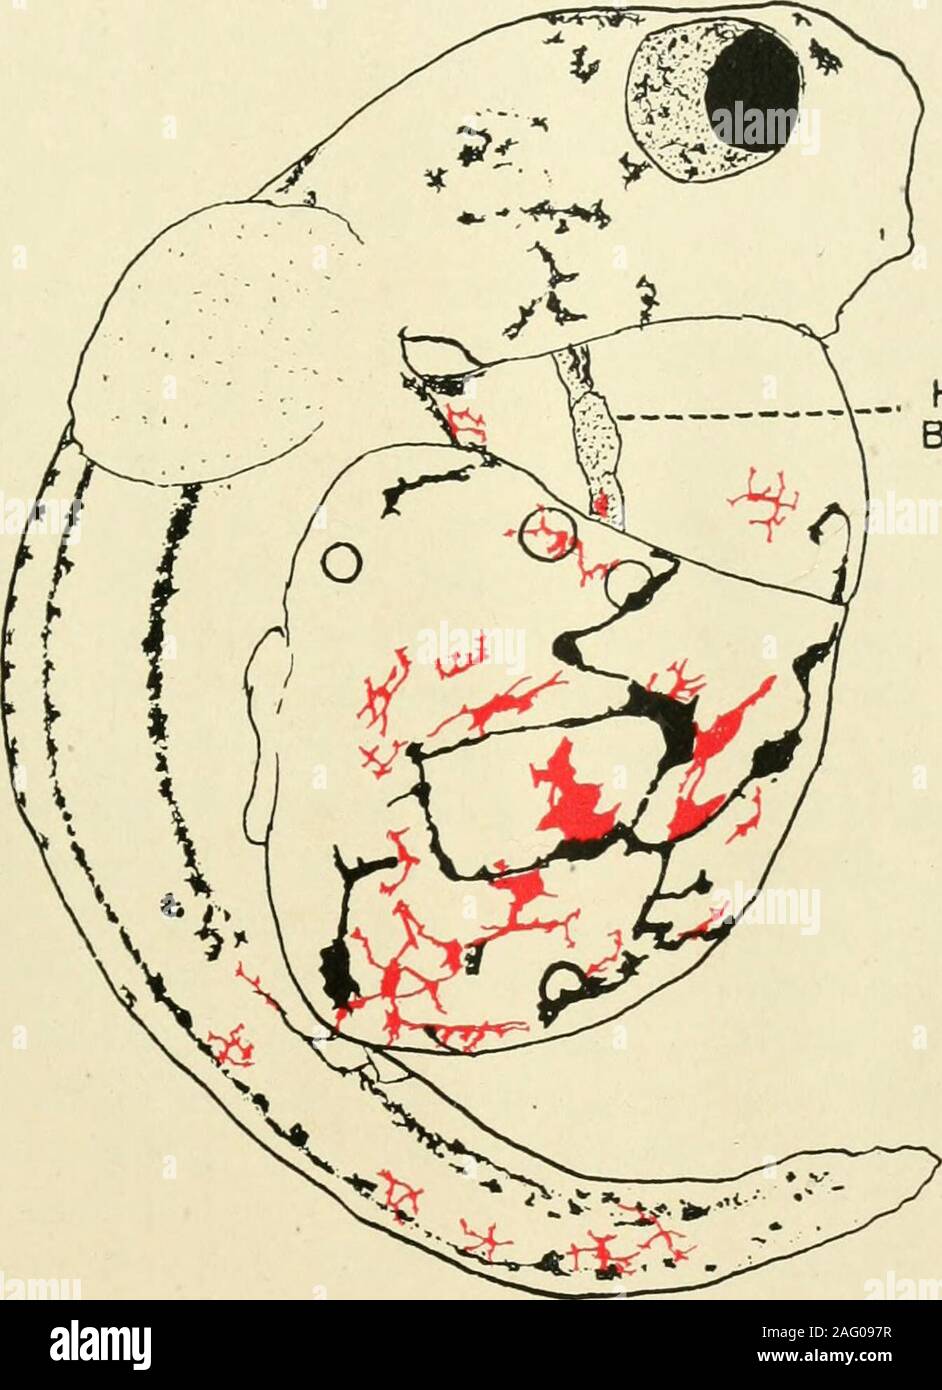 . Journal of morphology. Fig. 18 Embryo of Fundulus heteroclitus thirty-one days old, raised in 50 cc.sea water + 2 cc. 0.01 per cent NaCN. HEREDITY IN HETEROGENEOUS HYBRIDS 15. HeartBeating Fig. 19 Hybrid between Fundulus heteroclitus 9 and scup cf, twenty-fivedays old. THE BEHAVIOR OF THE CHROMOSOMES IN CROSSFERTILIZED ECHINOID EGGS^ DAVID H. TENNENT Bryn Mawr College * TWENTY FIGURES IN TWO PLATES It is my purpose to present in this paper some of the factsgained by a cytologieal study of Echinoid crosses gind to considercritically the results of Baltzer and Herbst in similar studies. In my Stock Photo